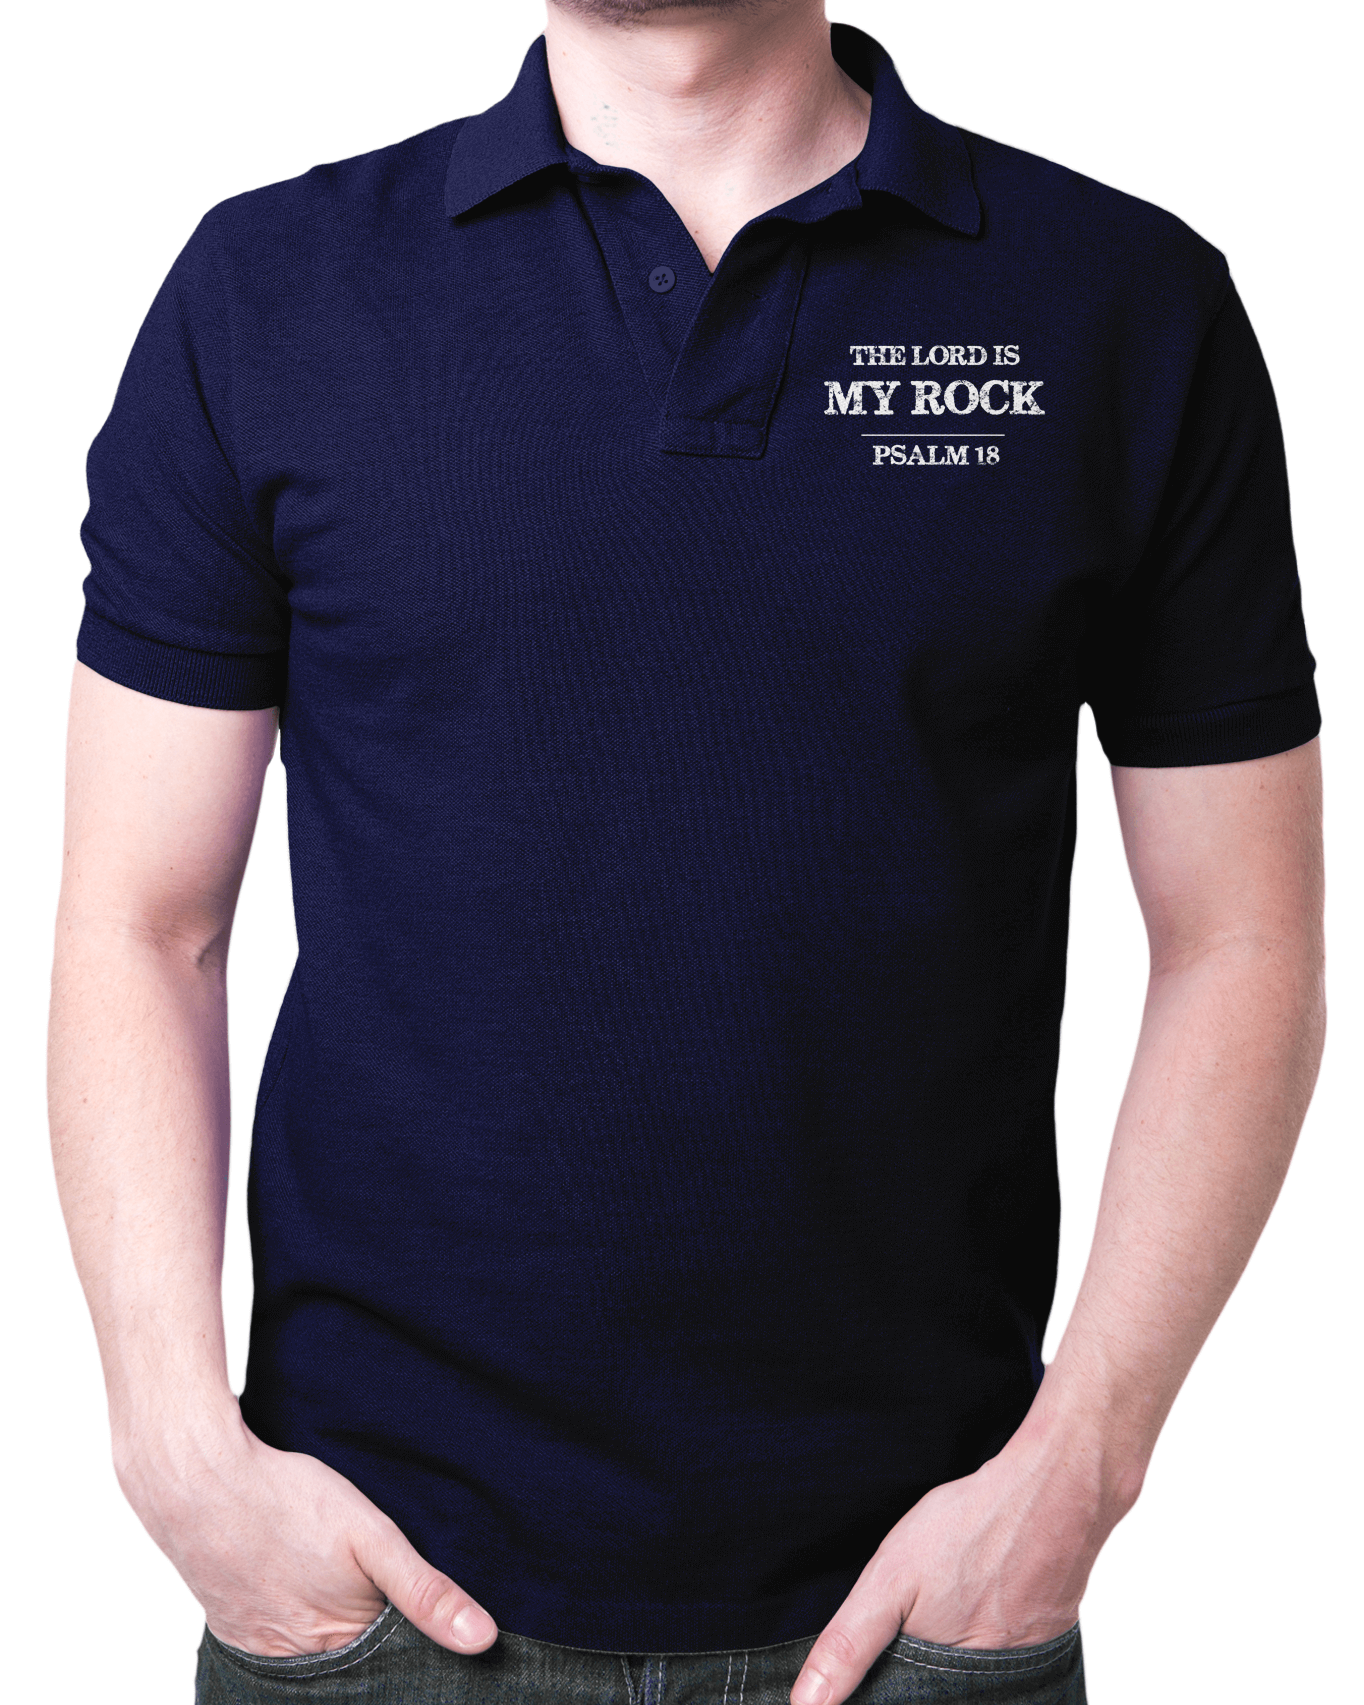 Living Words Men Polo T Shirt S / Navy Blue The Lord is my Rock- Polo T Shirt